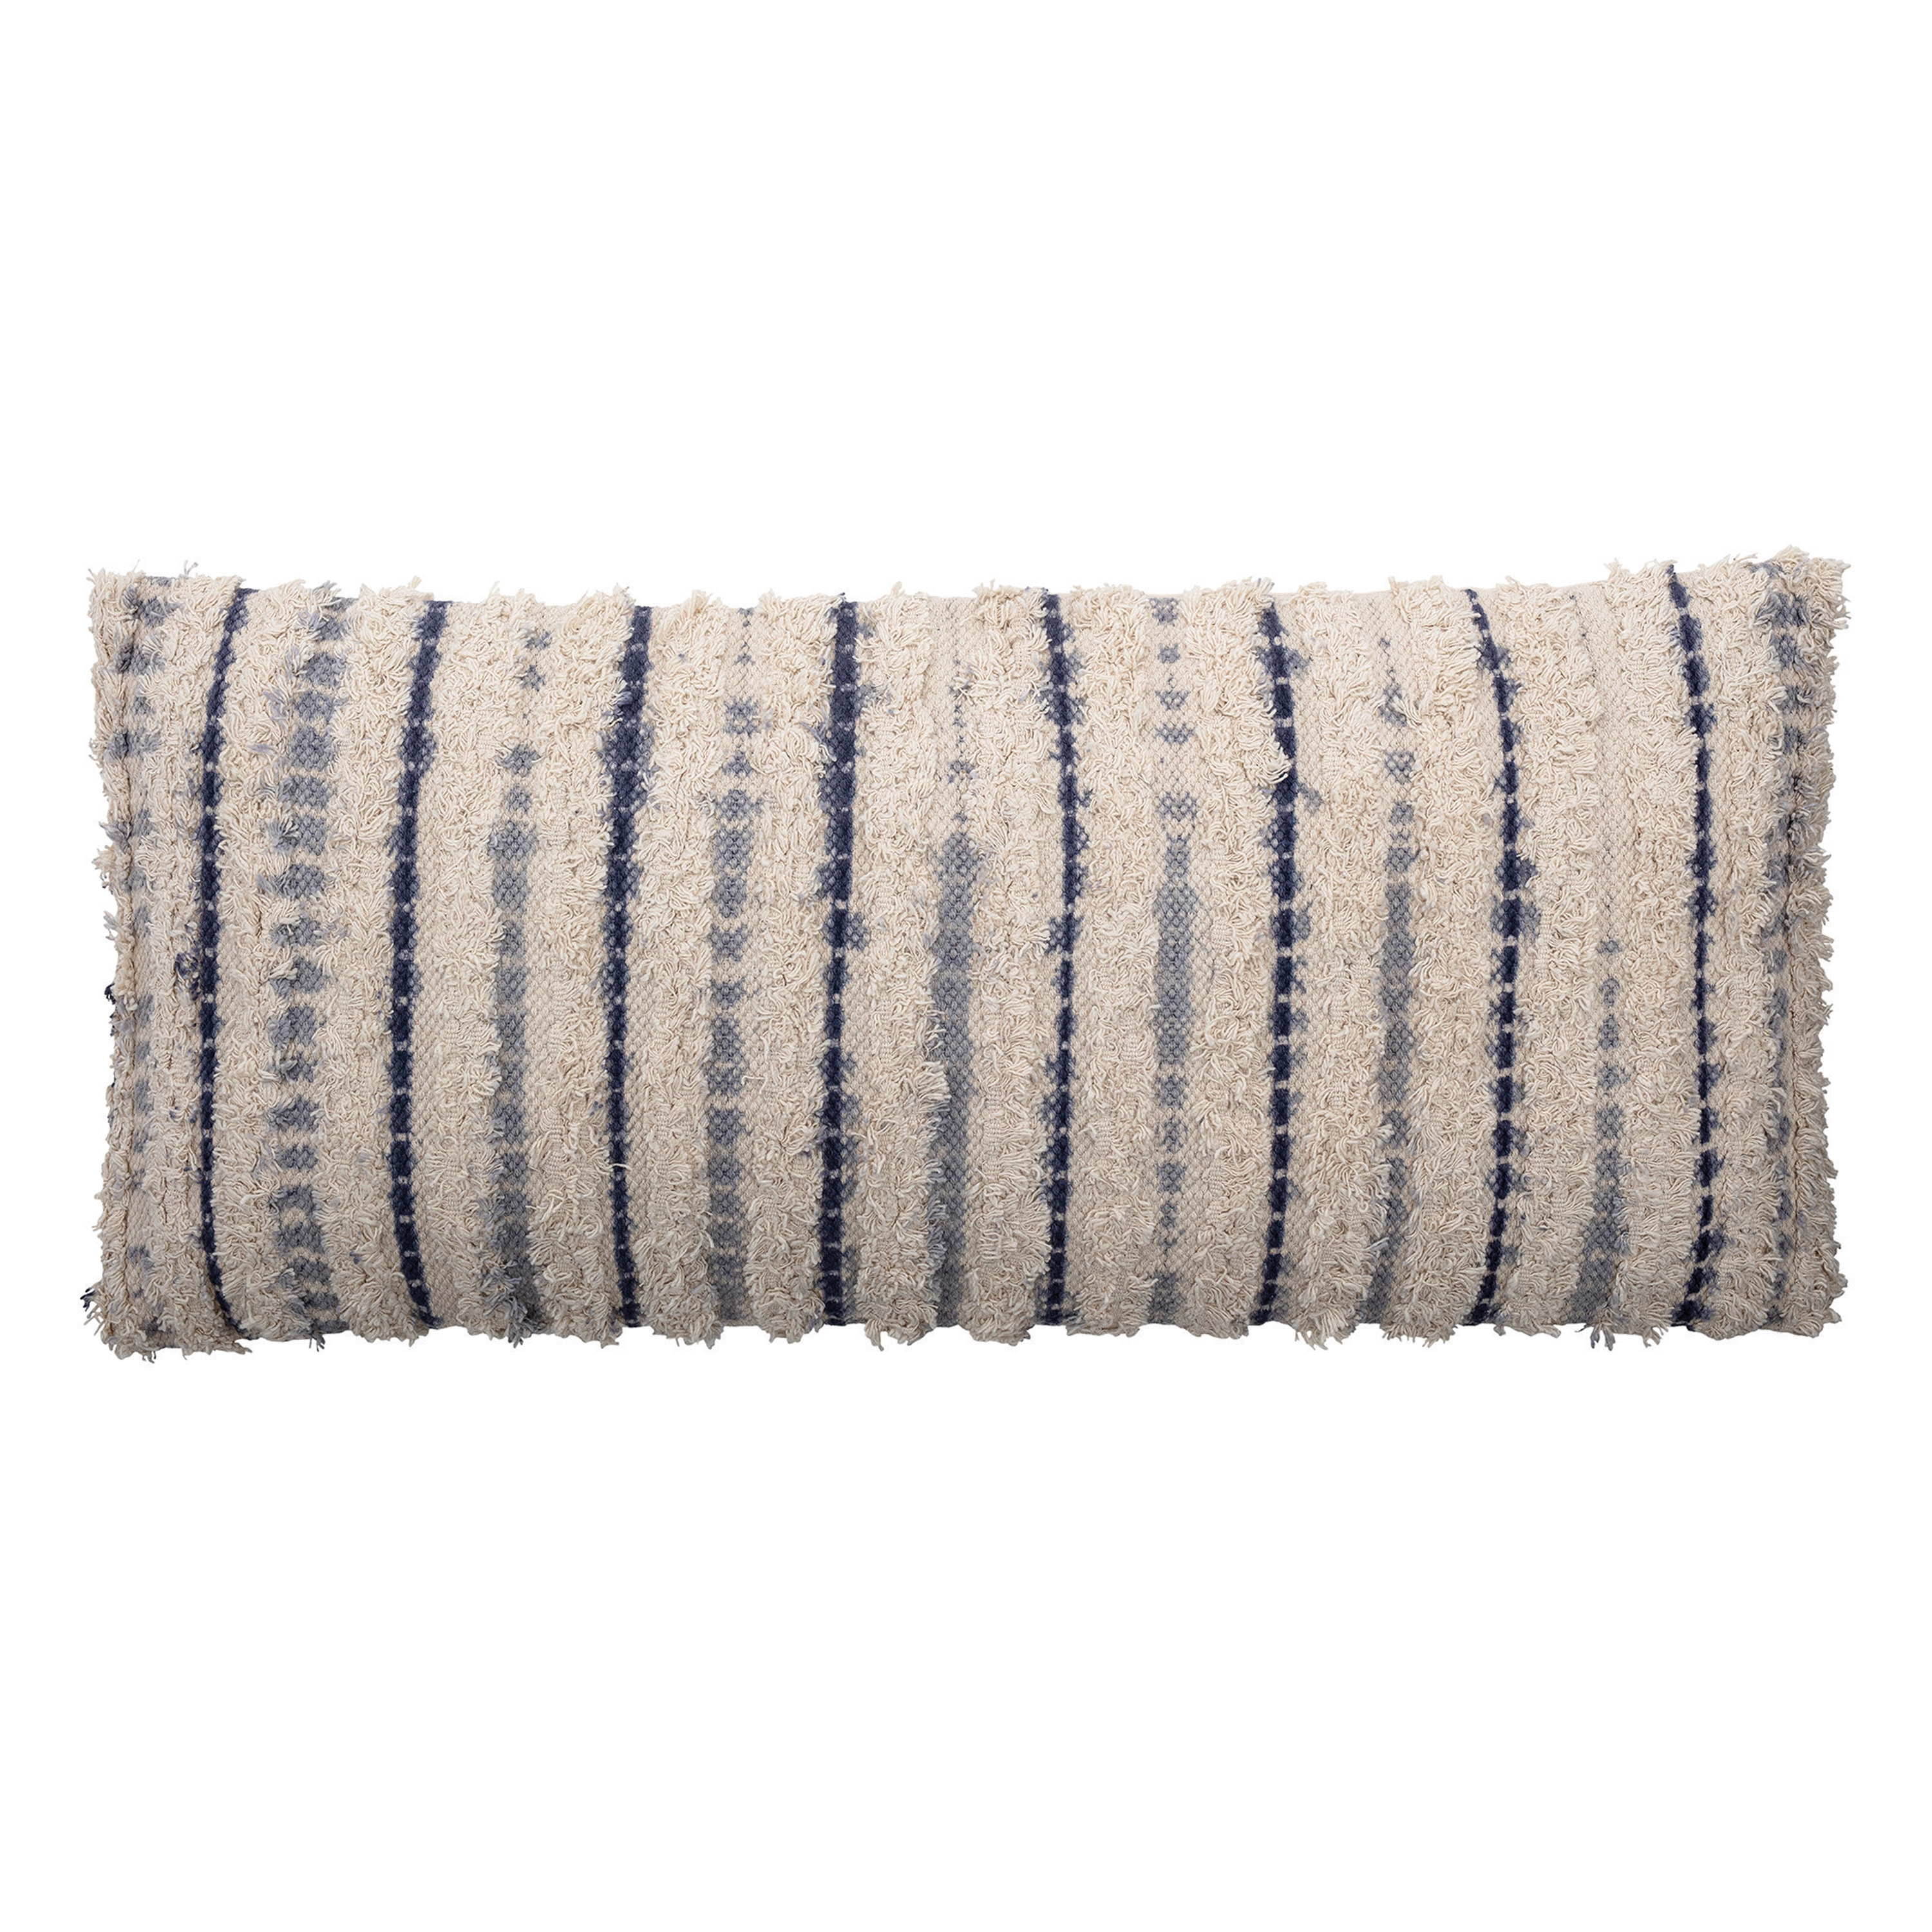 Textured Lumbar Pillow with Tie-Dyed Stripes, Cotton, 36" x 16" - Image 0